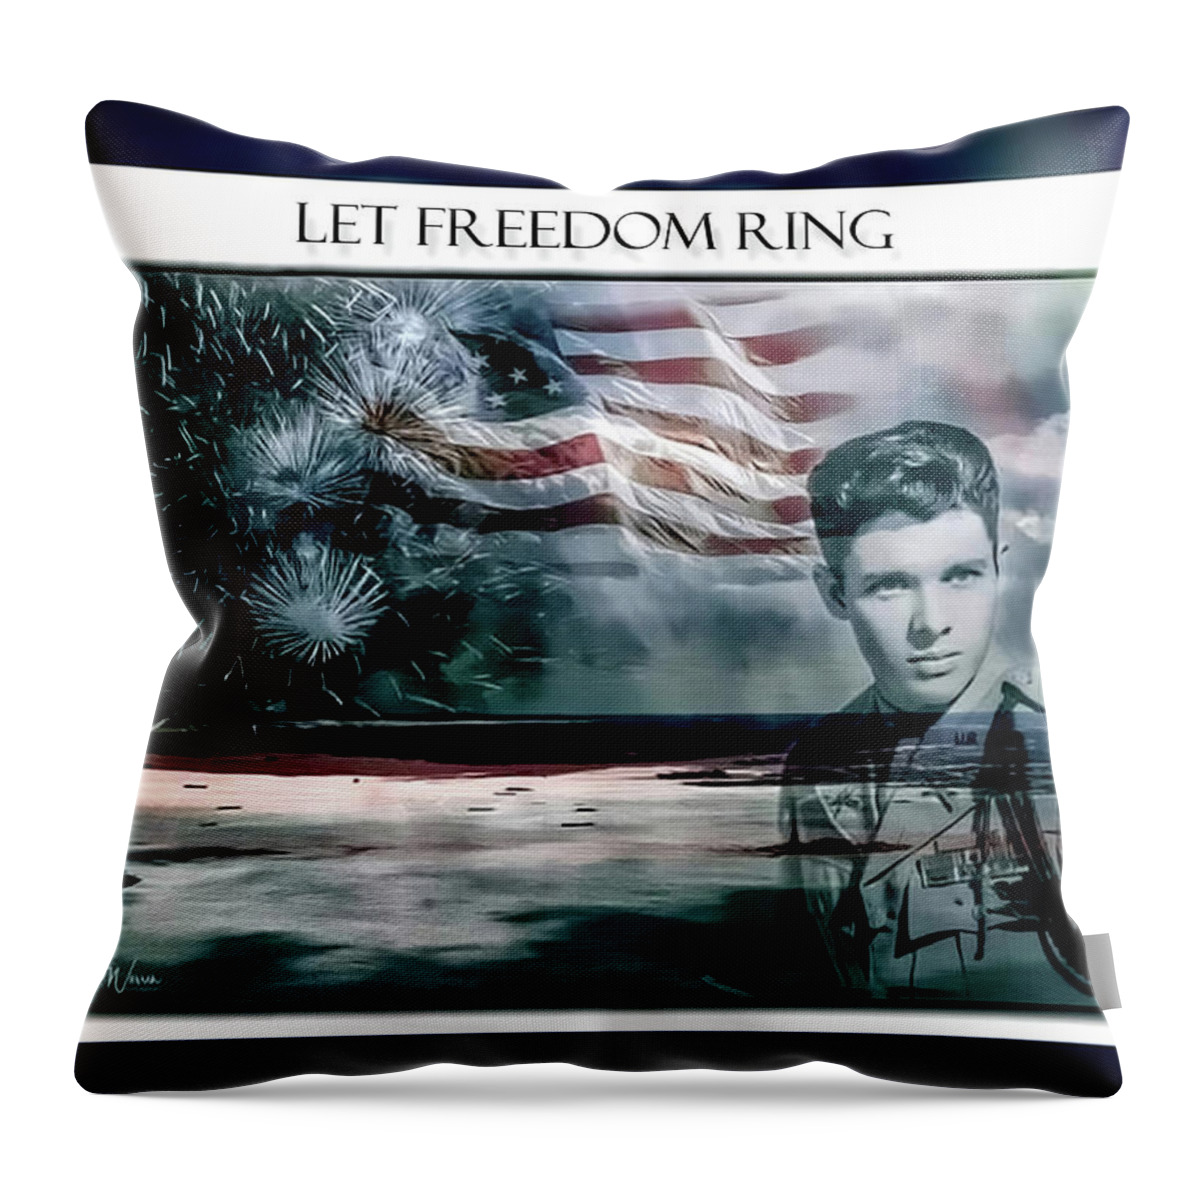 Audie Murphy Throw Pillow featuring the photograph Audie Murphy - Let Freedom Ring by Dyle Warren